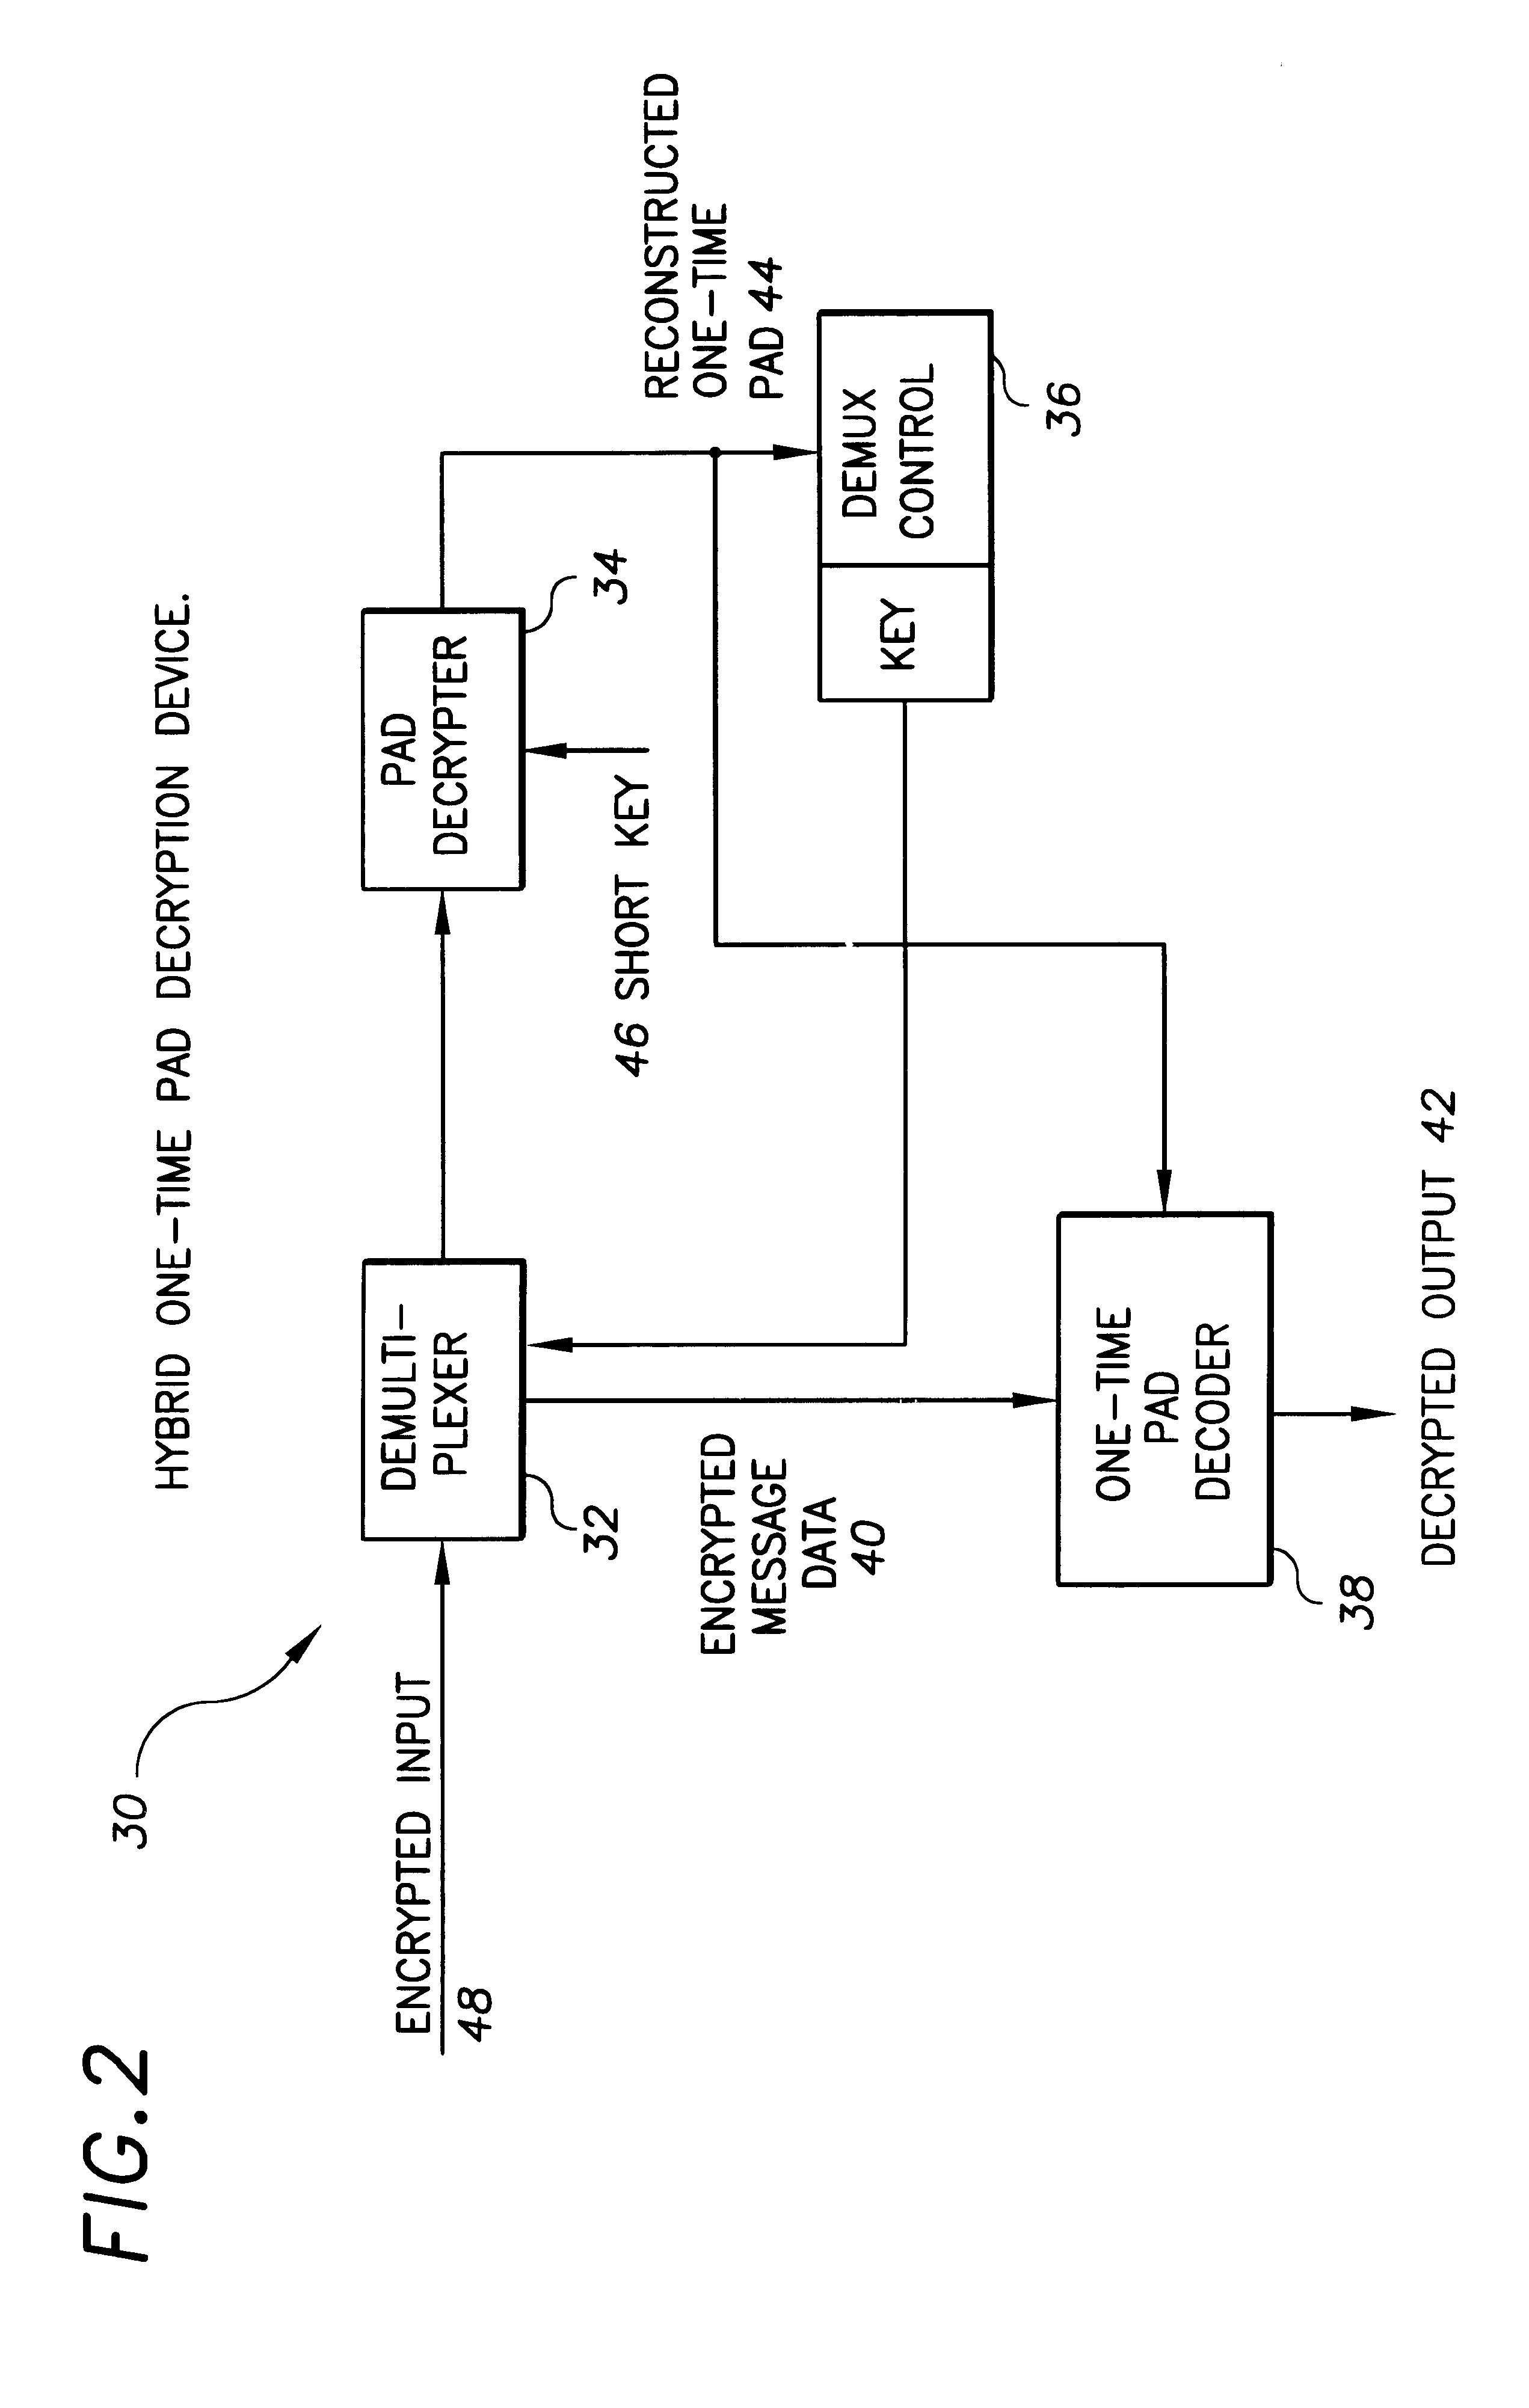 Hybrid one time pad encryption and decryption apparatus with methods for encrypting and decrypting data